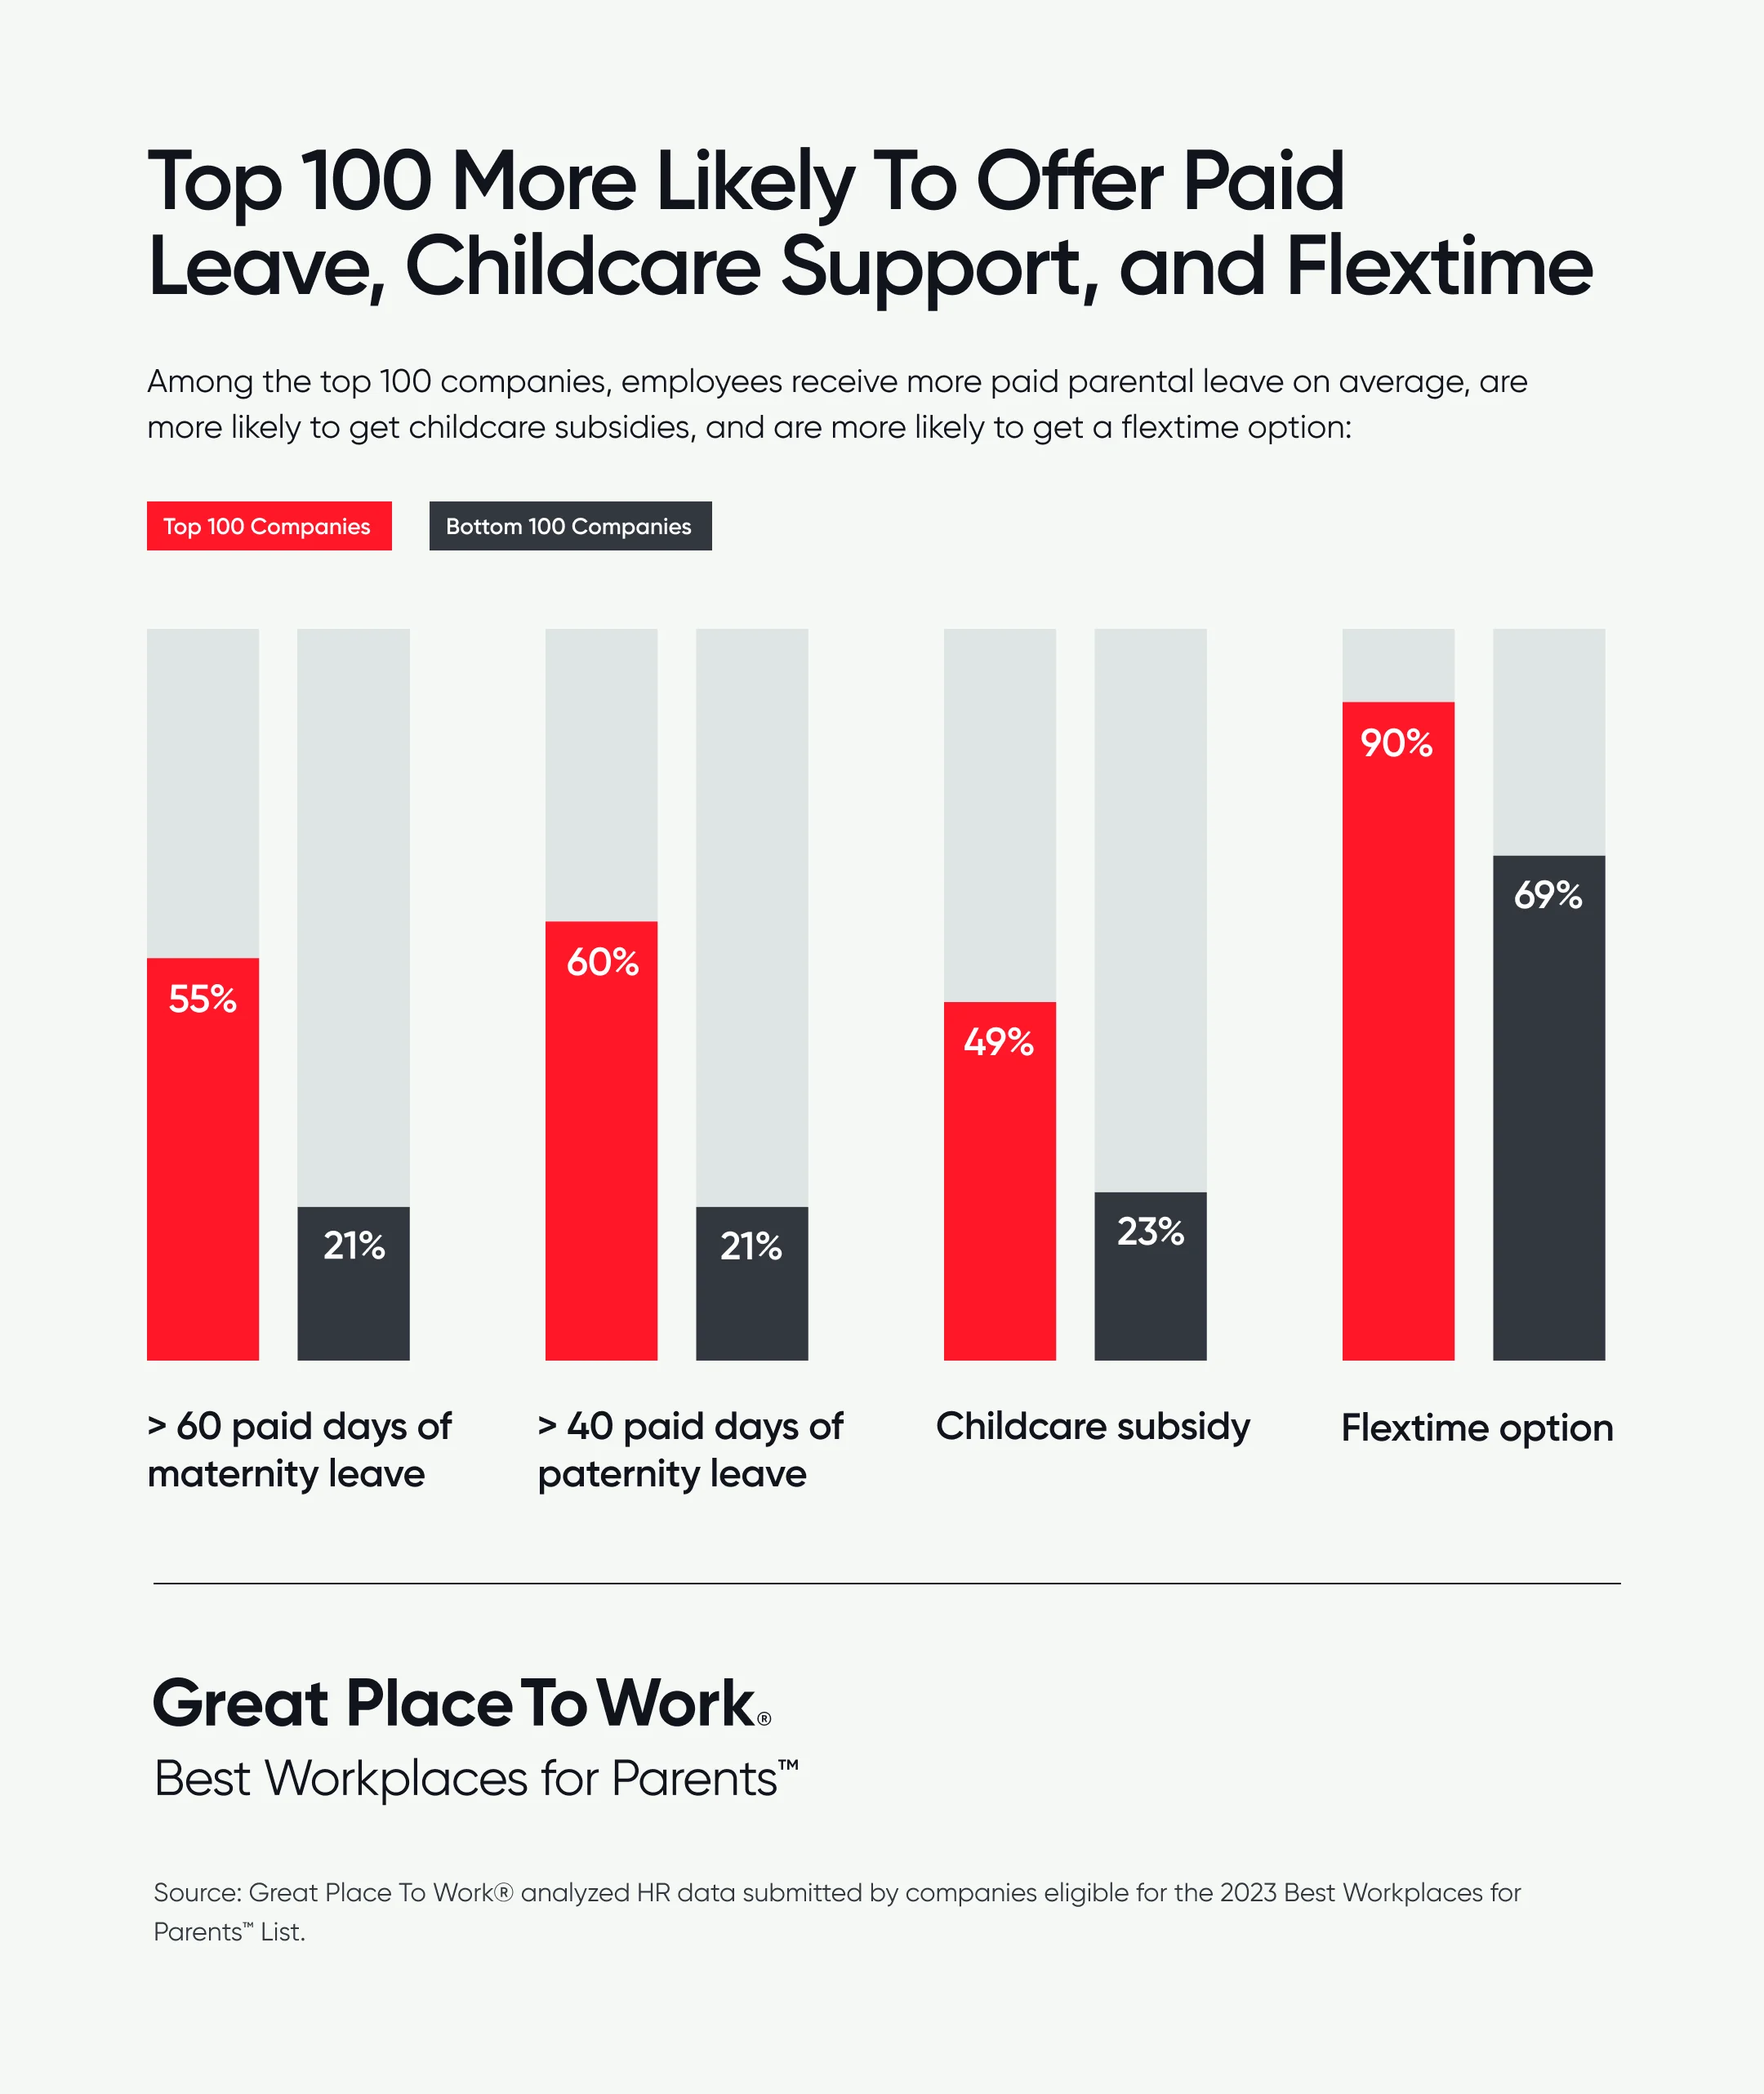 Top 100 More Likely To Offer Paid Leave Childcare Support and Flextime 1